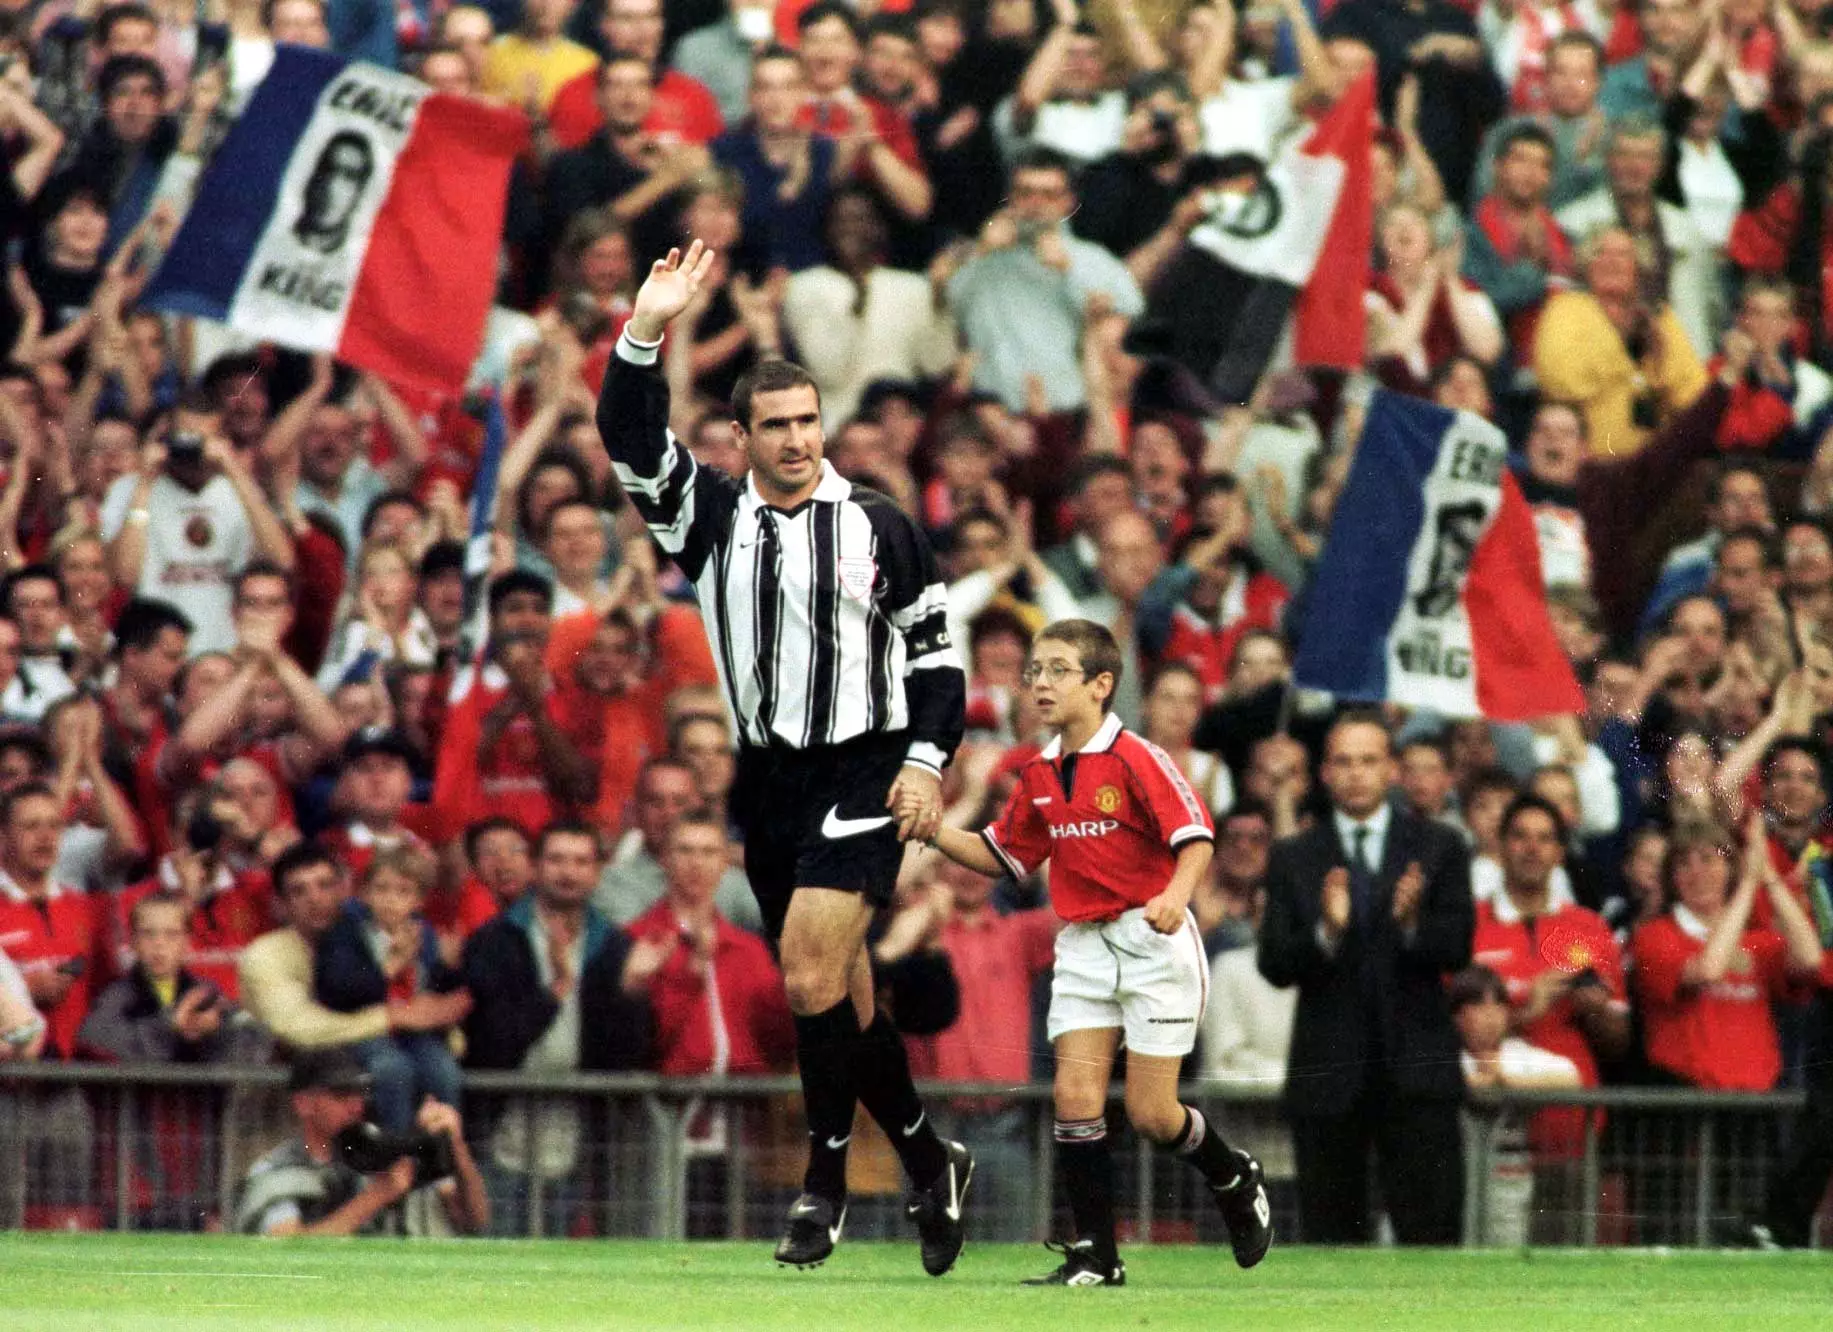 Cantona started the game for Europe XI, before switching at half-time. Image: PA Images